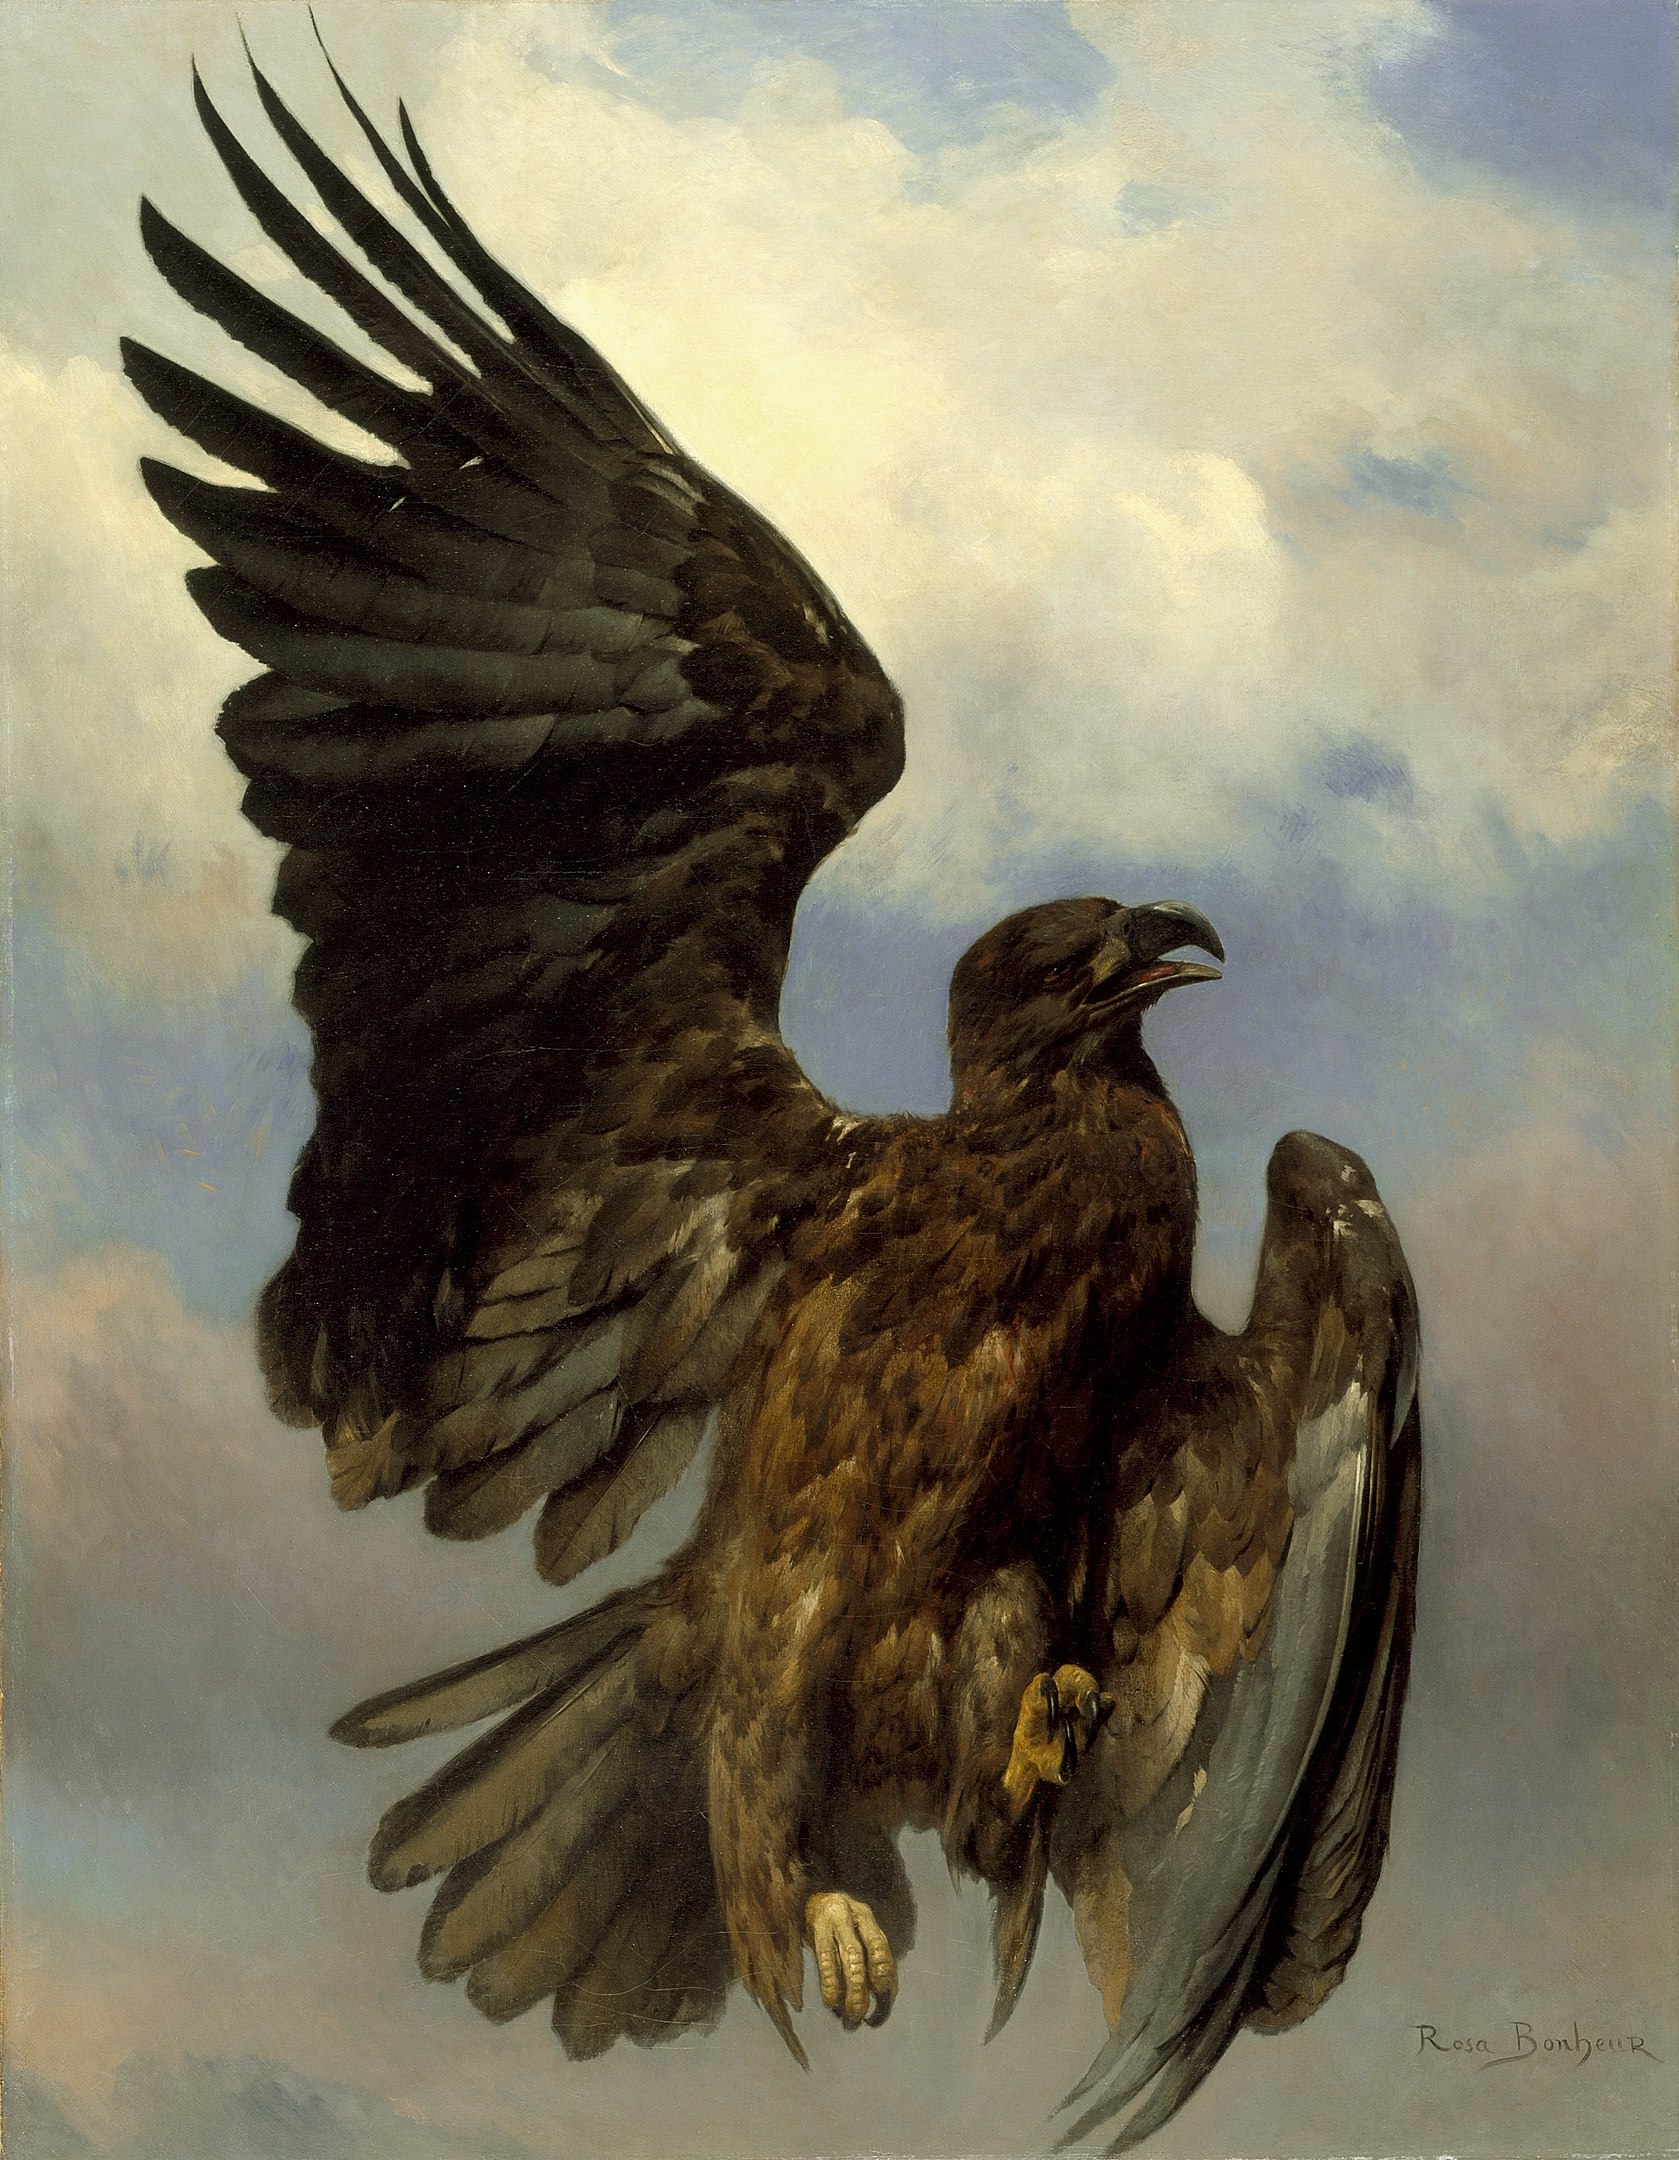 An wounded eagle in the sky